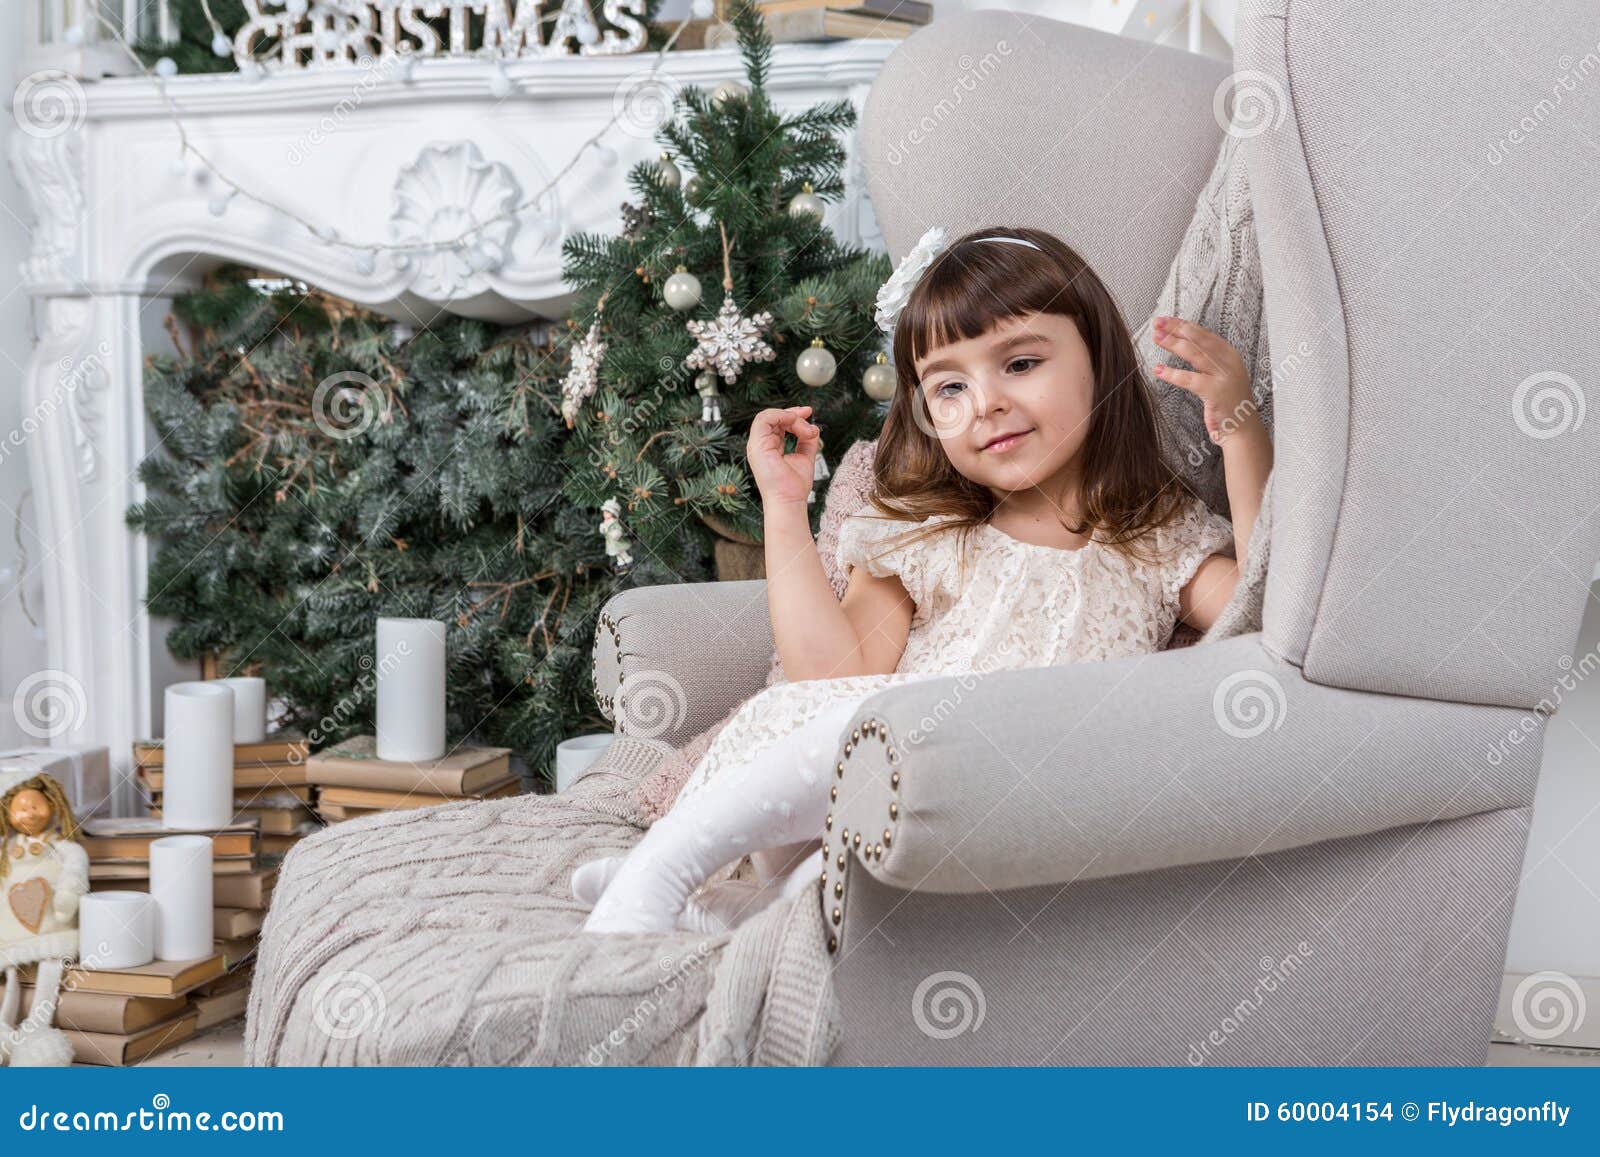 Download Merry Christmas Cute Happy Little Girl Stock Image of fortable celebration